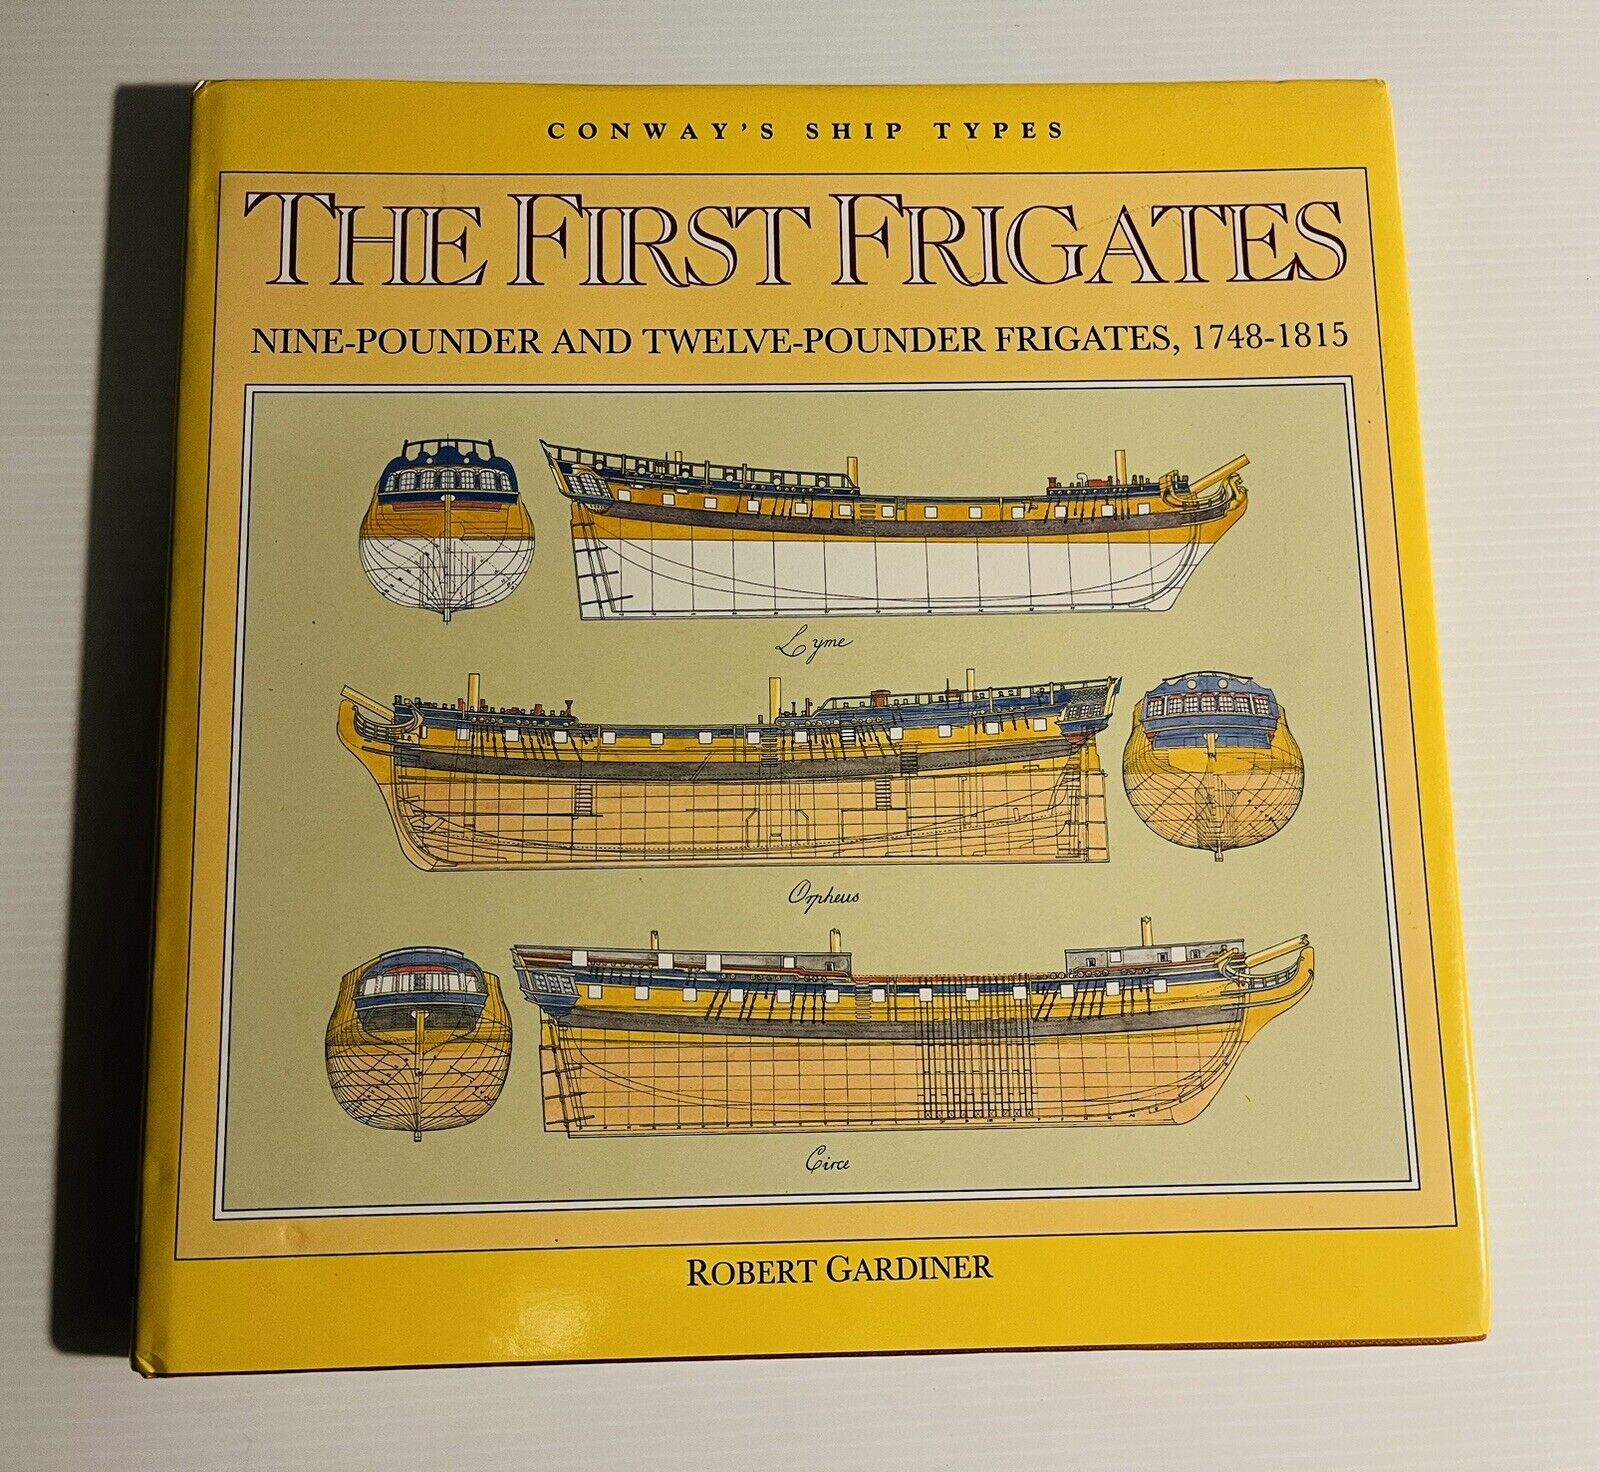 Conway's Ship Types The First Frigates  1992 Robert Gardiner  Very Clean book